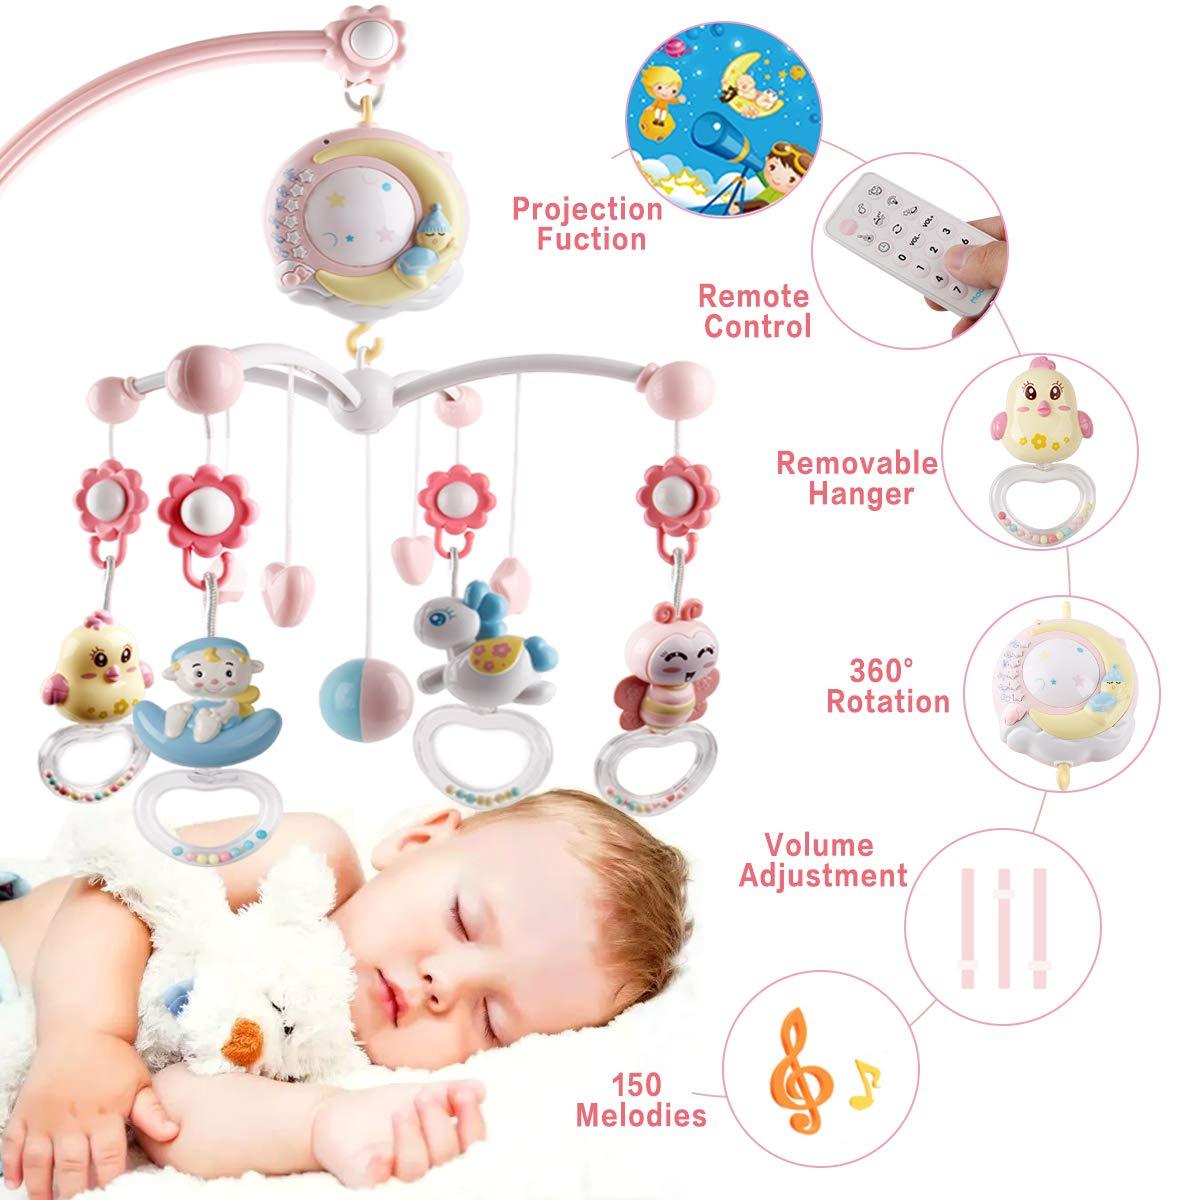 Baby Musical Crib Bed Bell Cot Mobile Moon & Star Dream Light Nusery Lullaby Toy